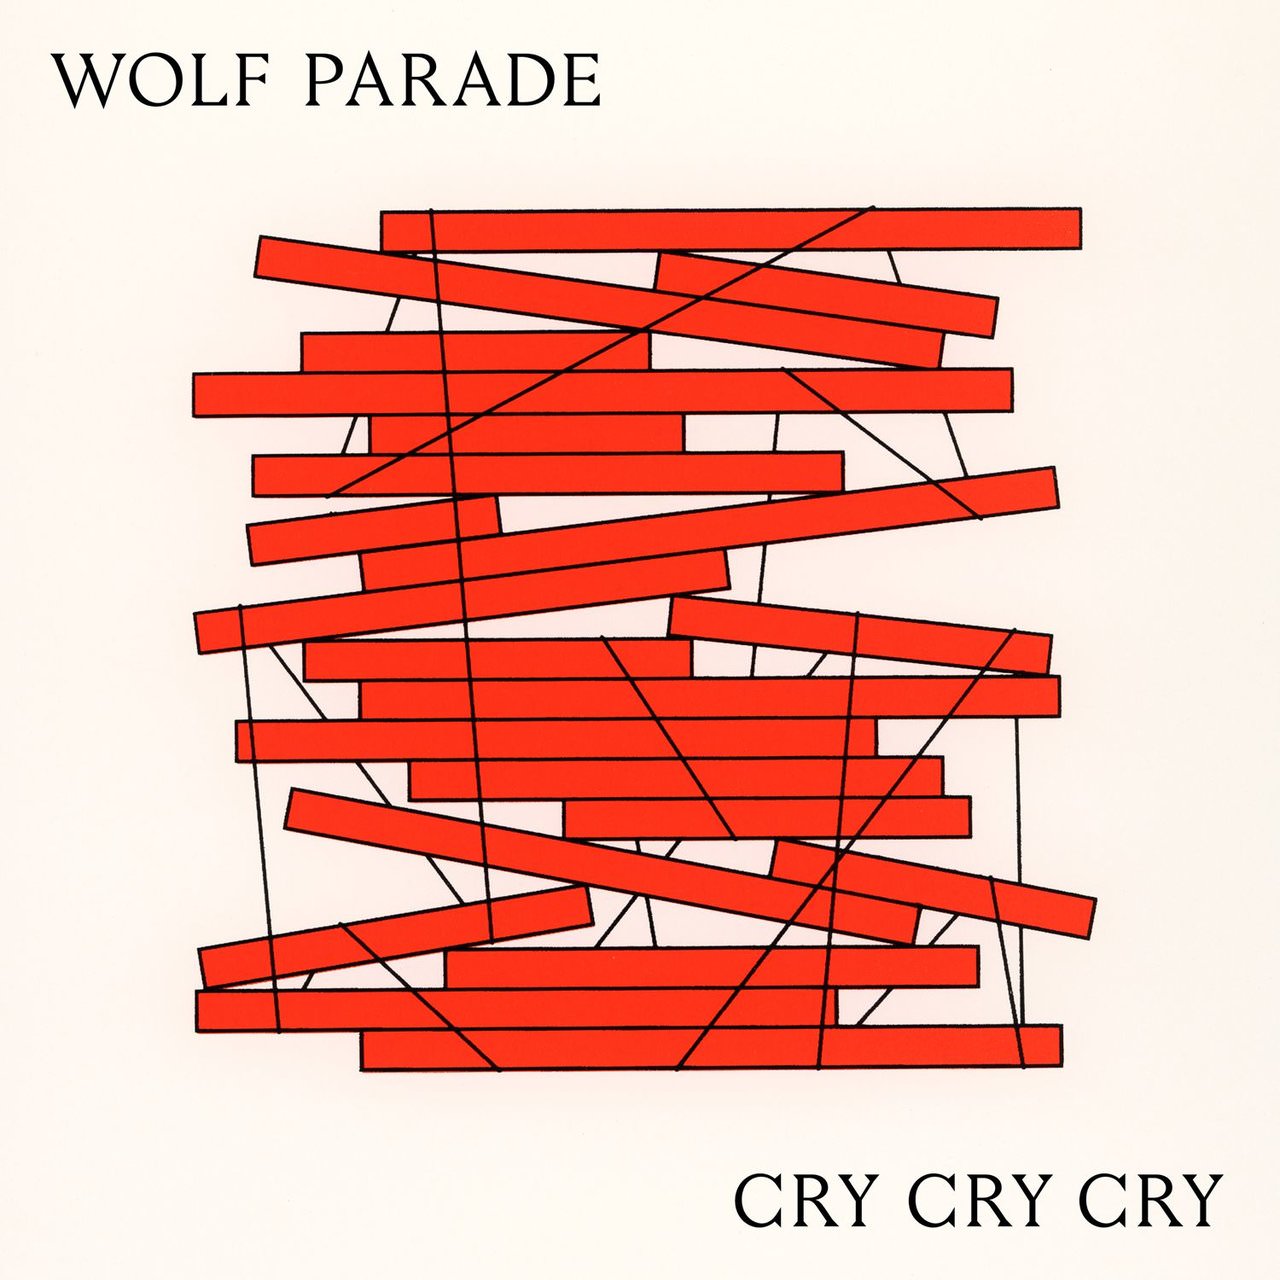 Wolf Parade - Cry Cry Cry (2017) [FLAC 24bit/48kHz]